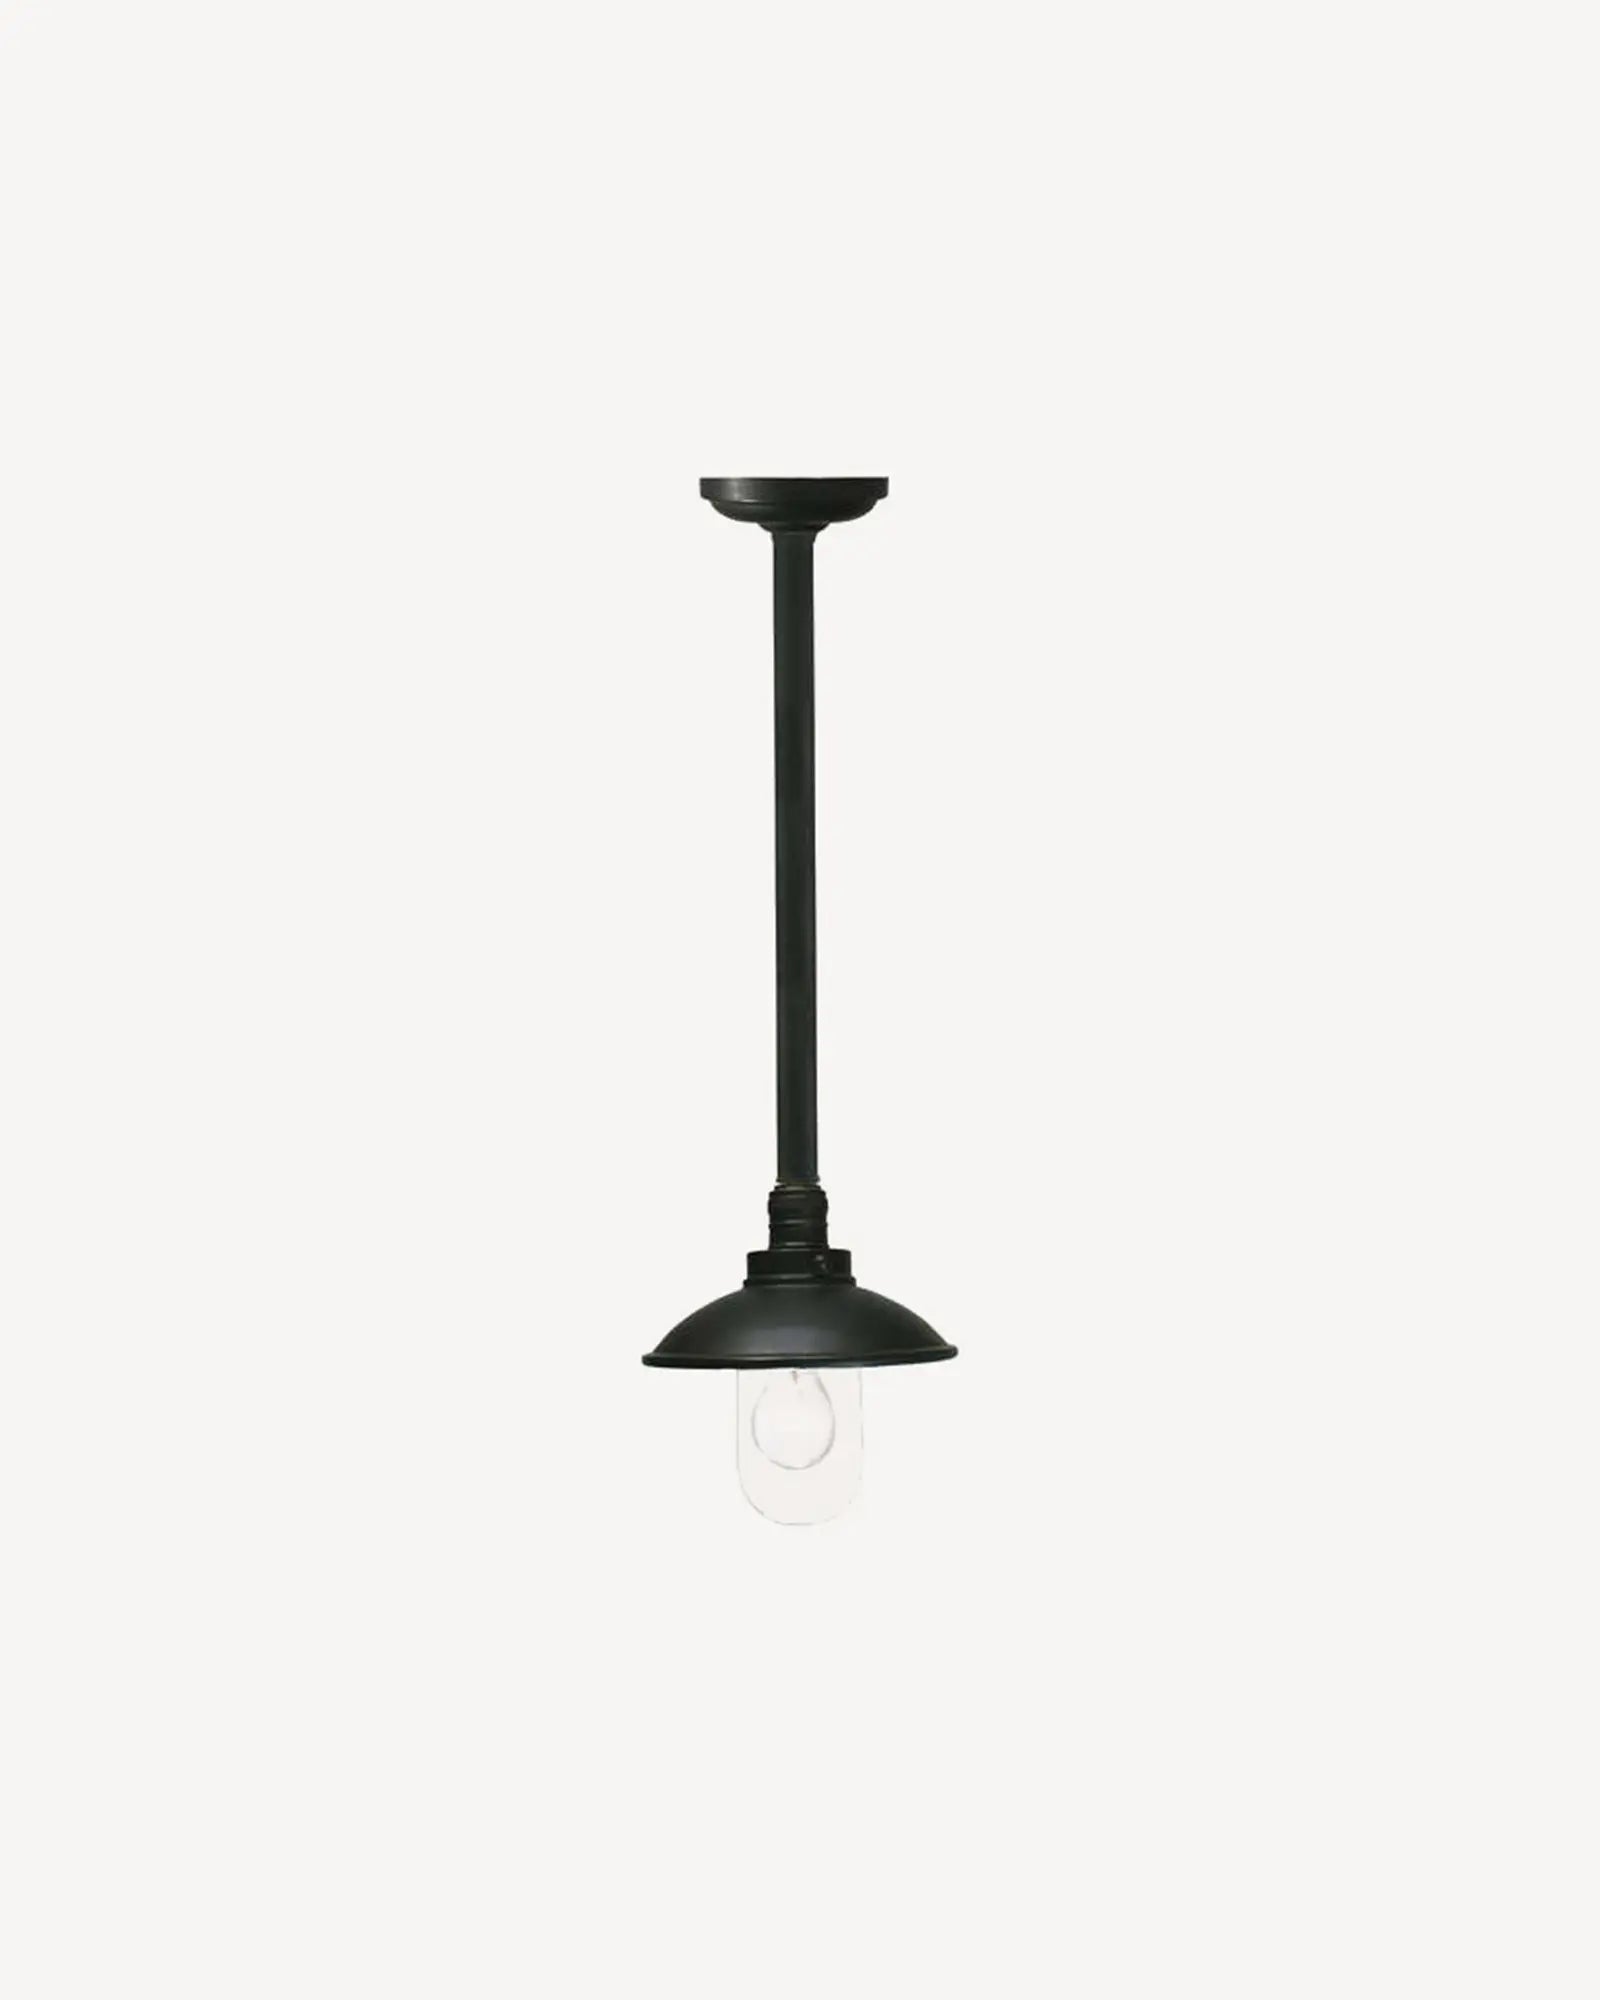 Port rod outdoor pendant light by Inspiration Light at Nook Collections